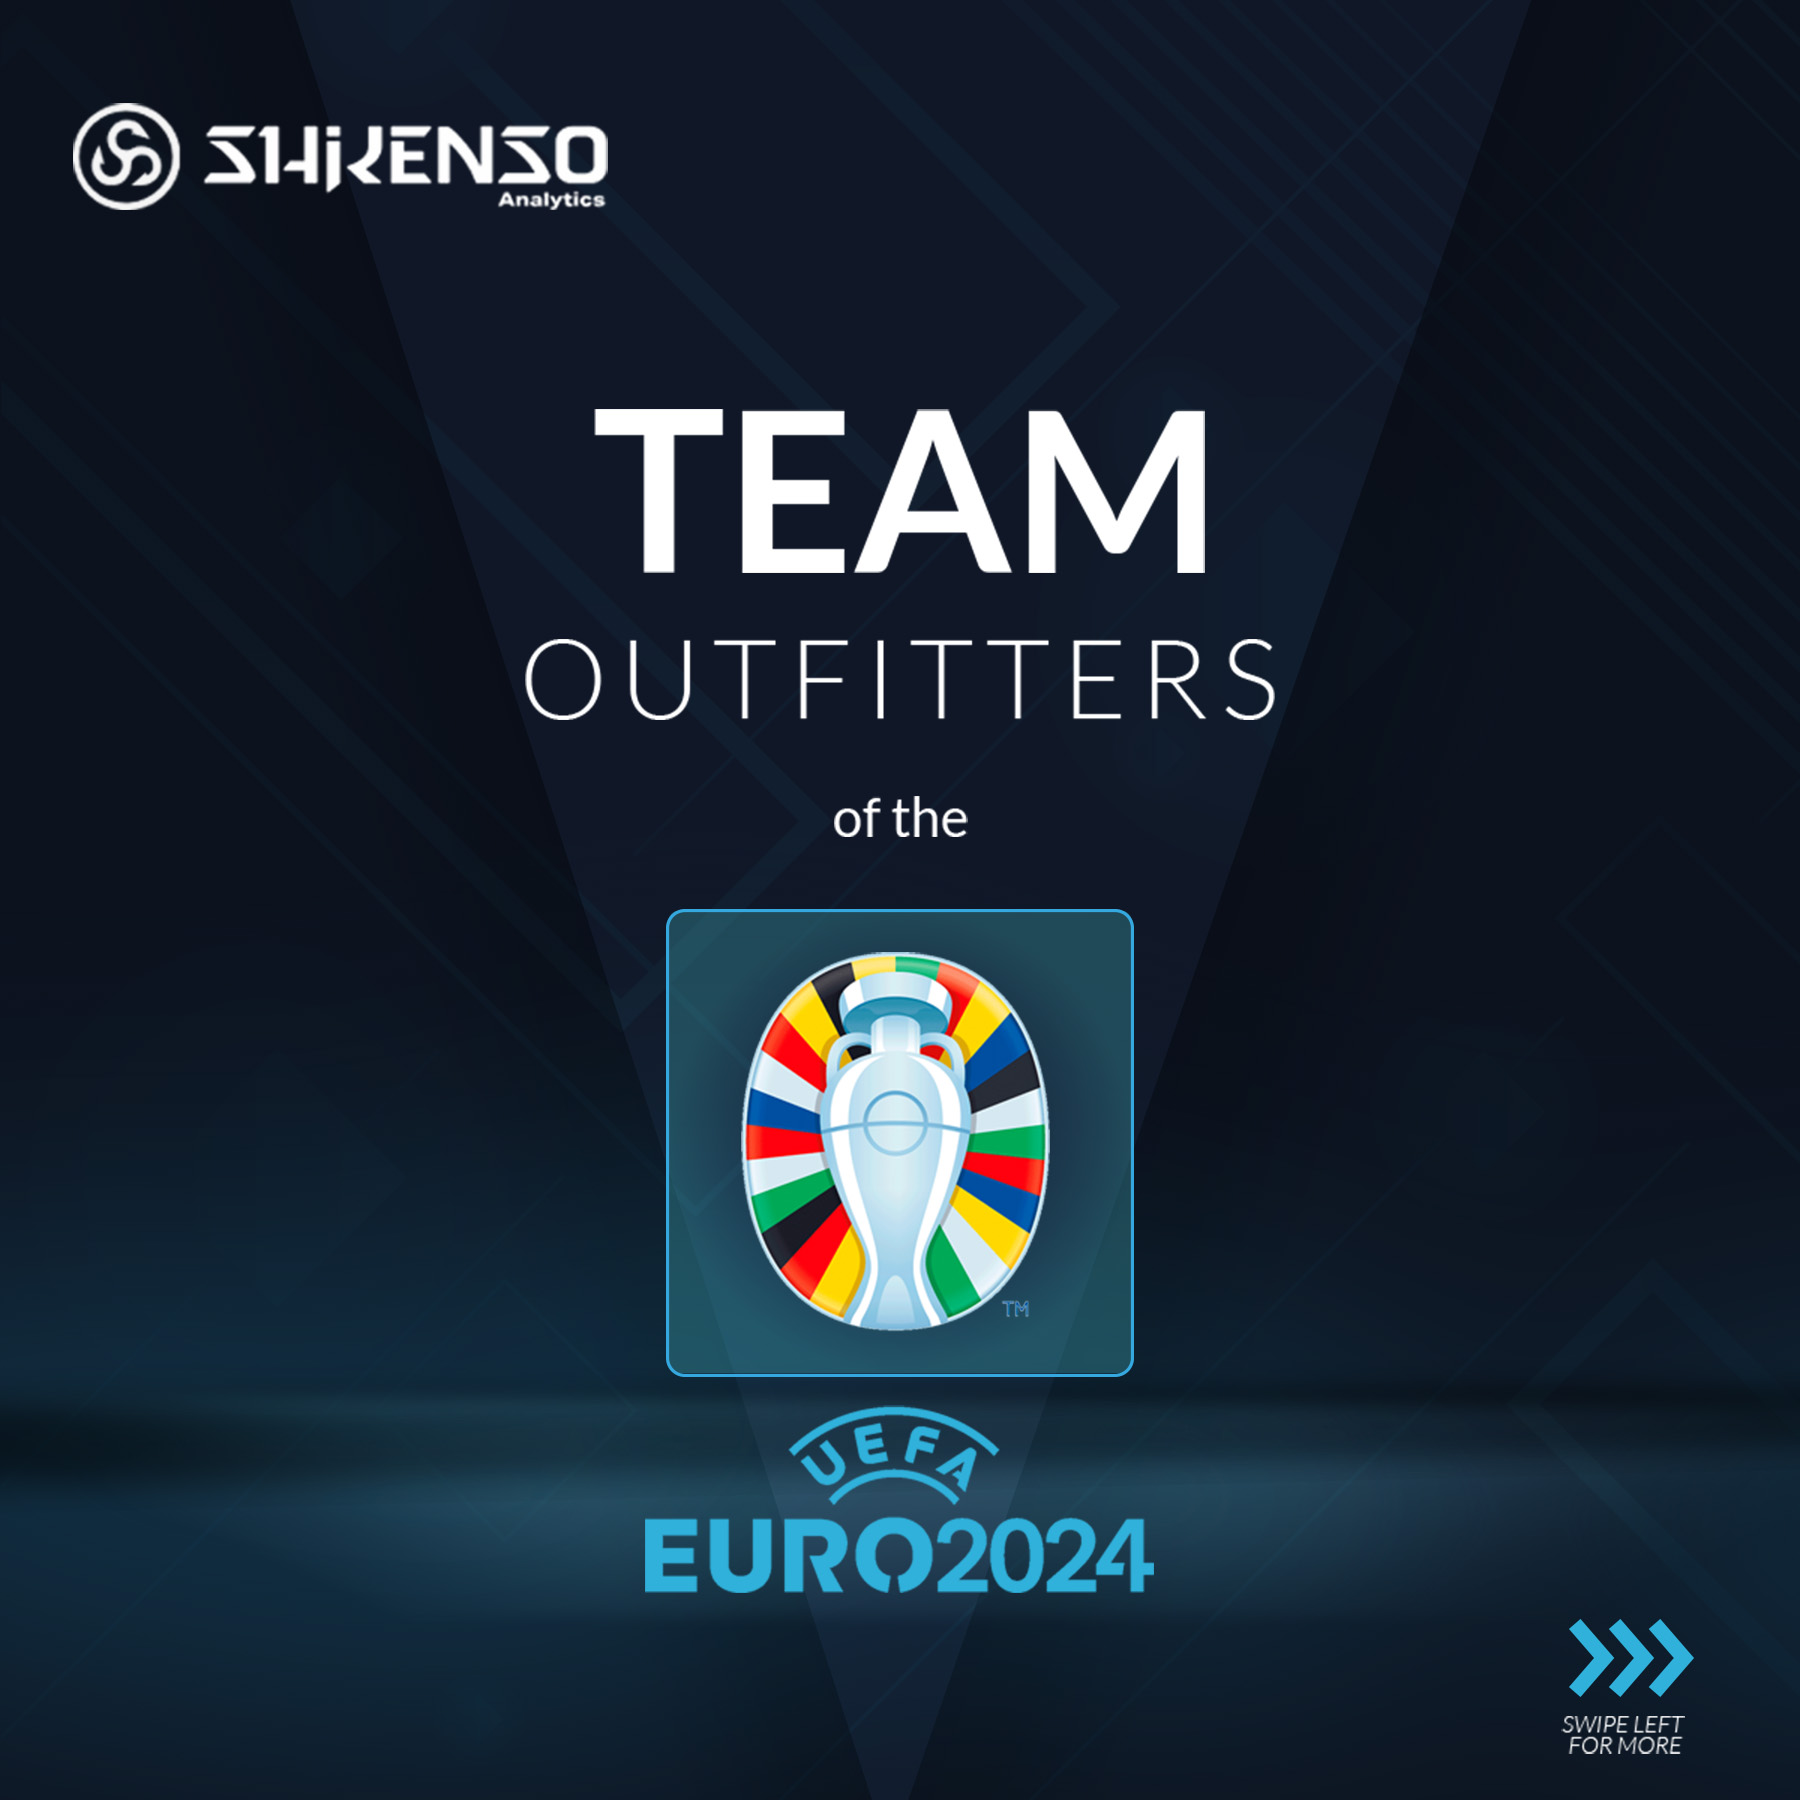 Discover the top sportswear brands outfitting teams for EURO 2024 with Shikenso Analytics.